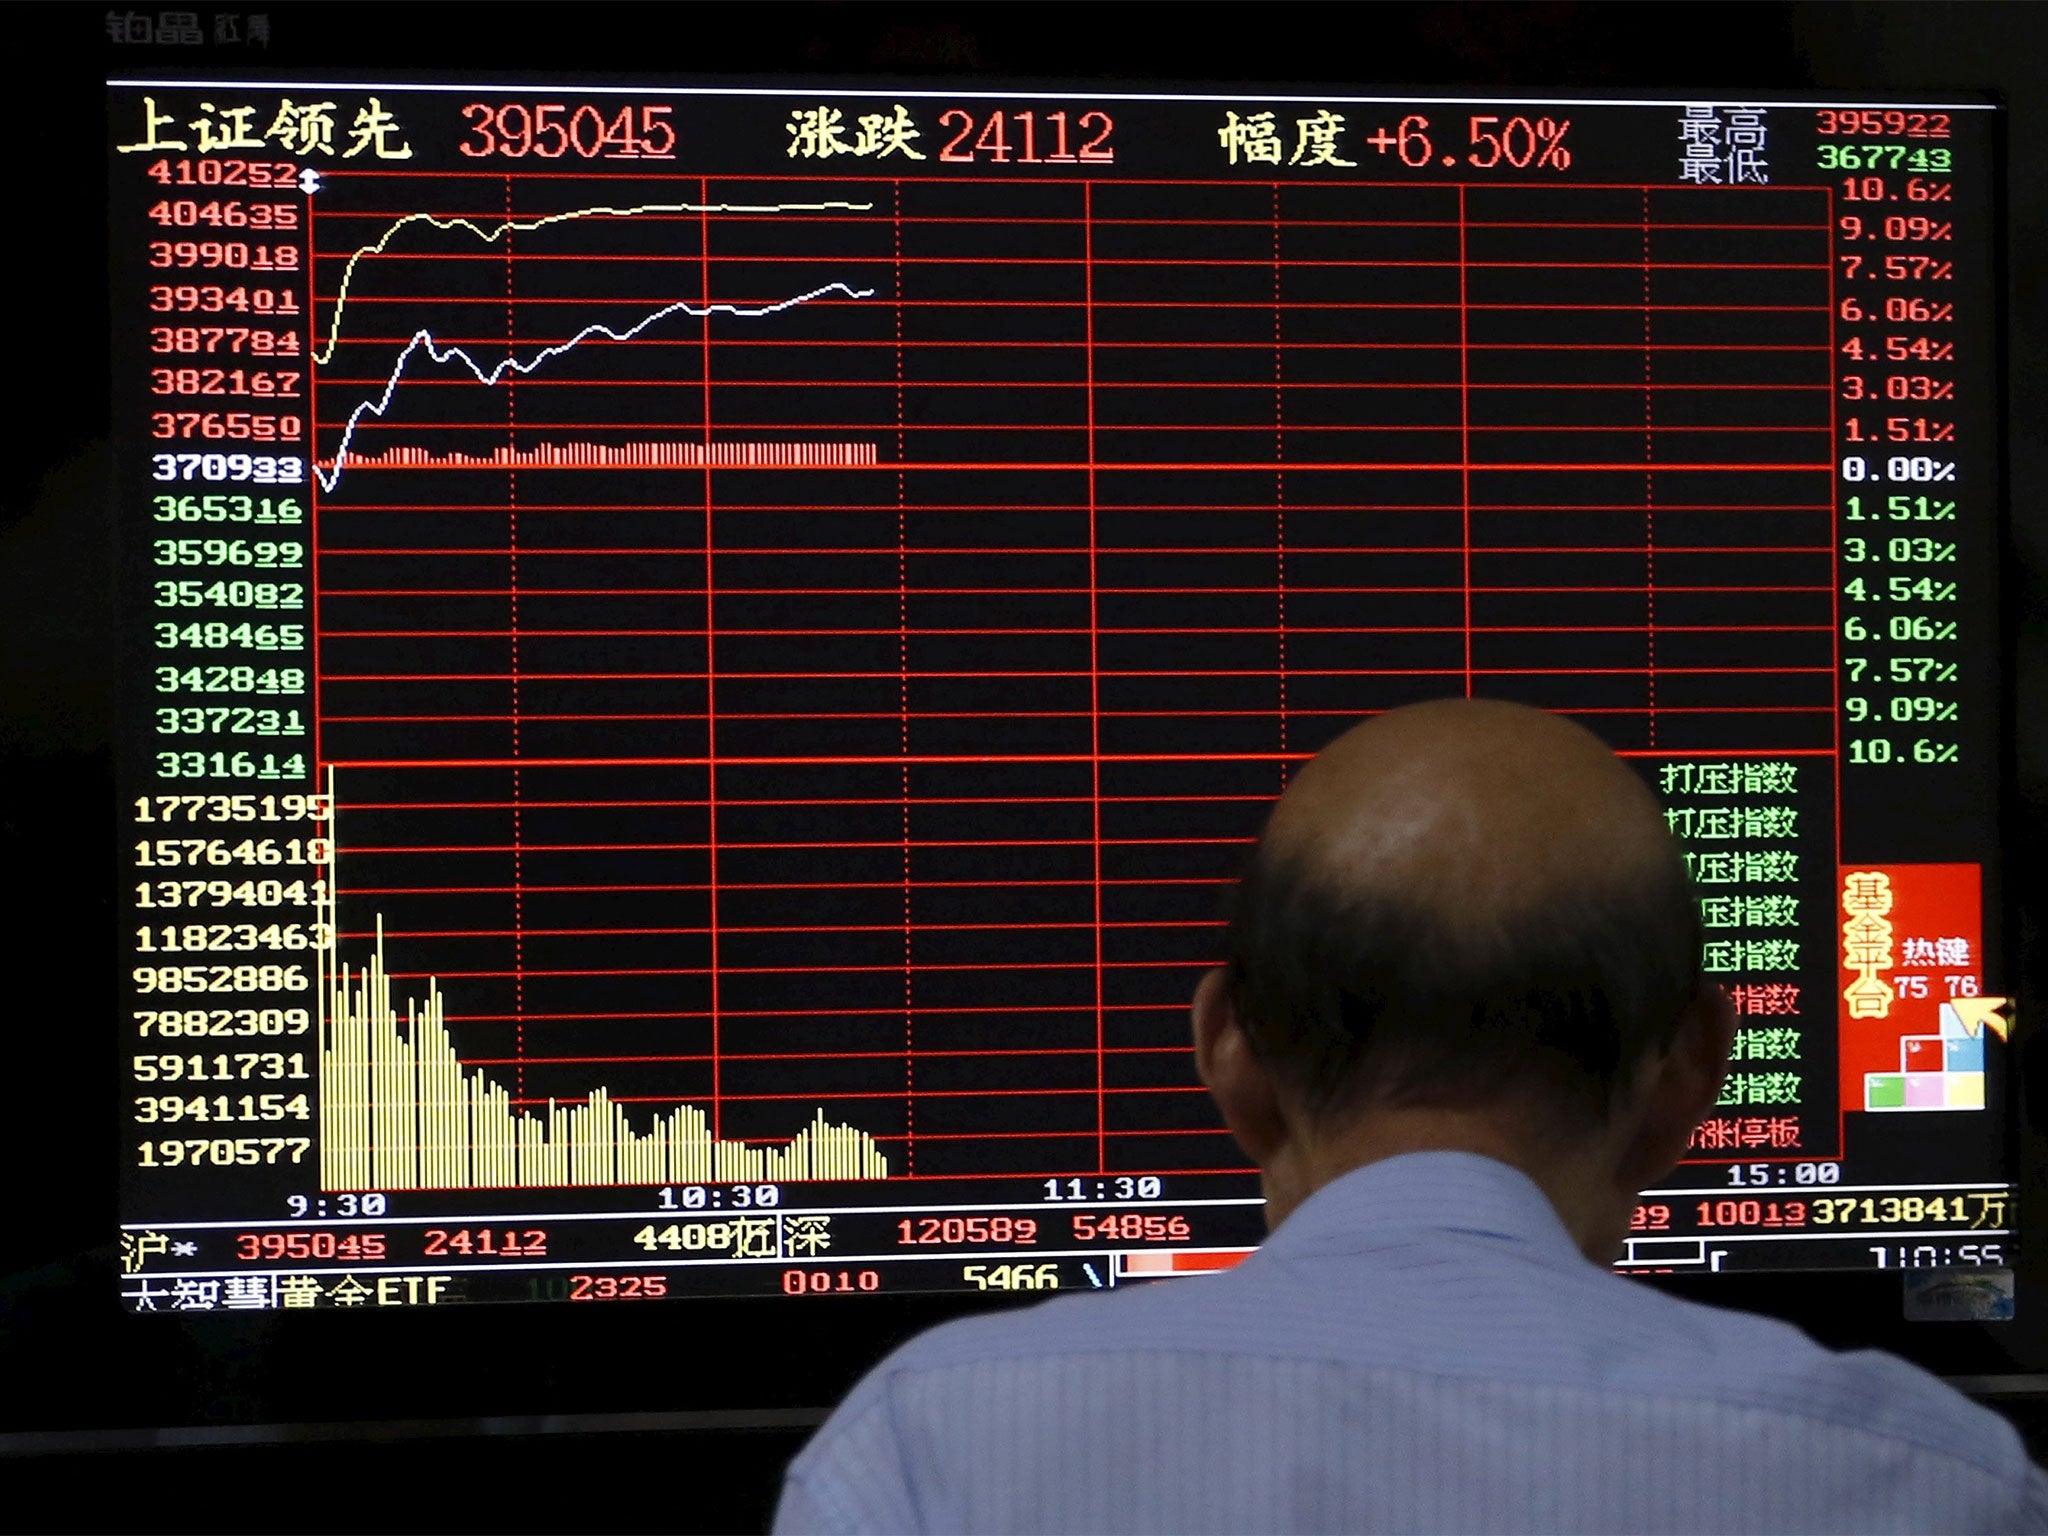 China's stock market has tanked in the last month, losing 30 per cent of its value